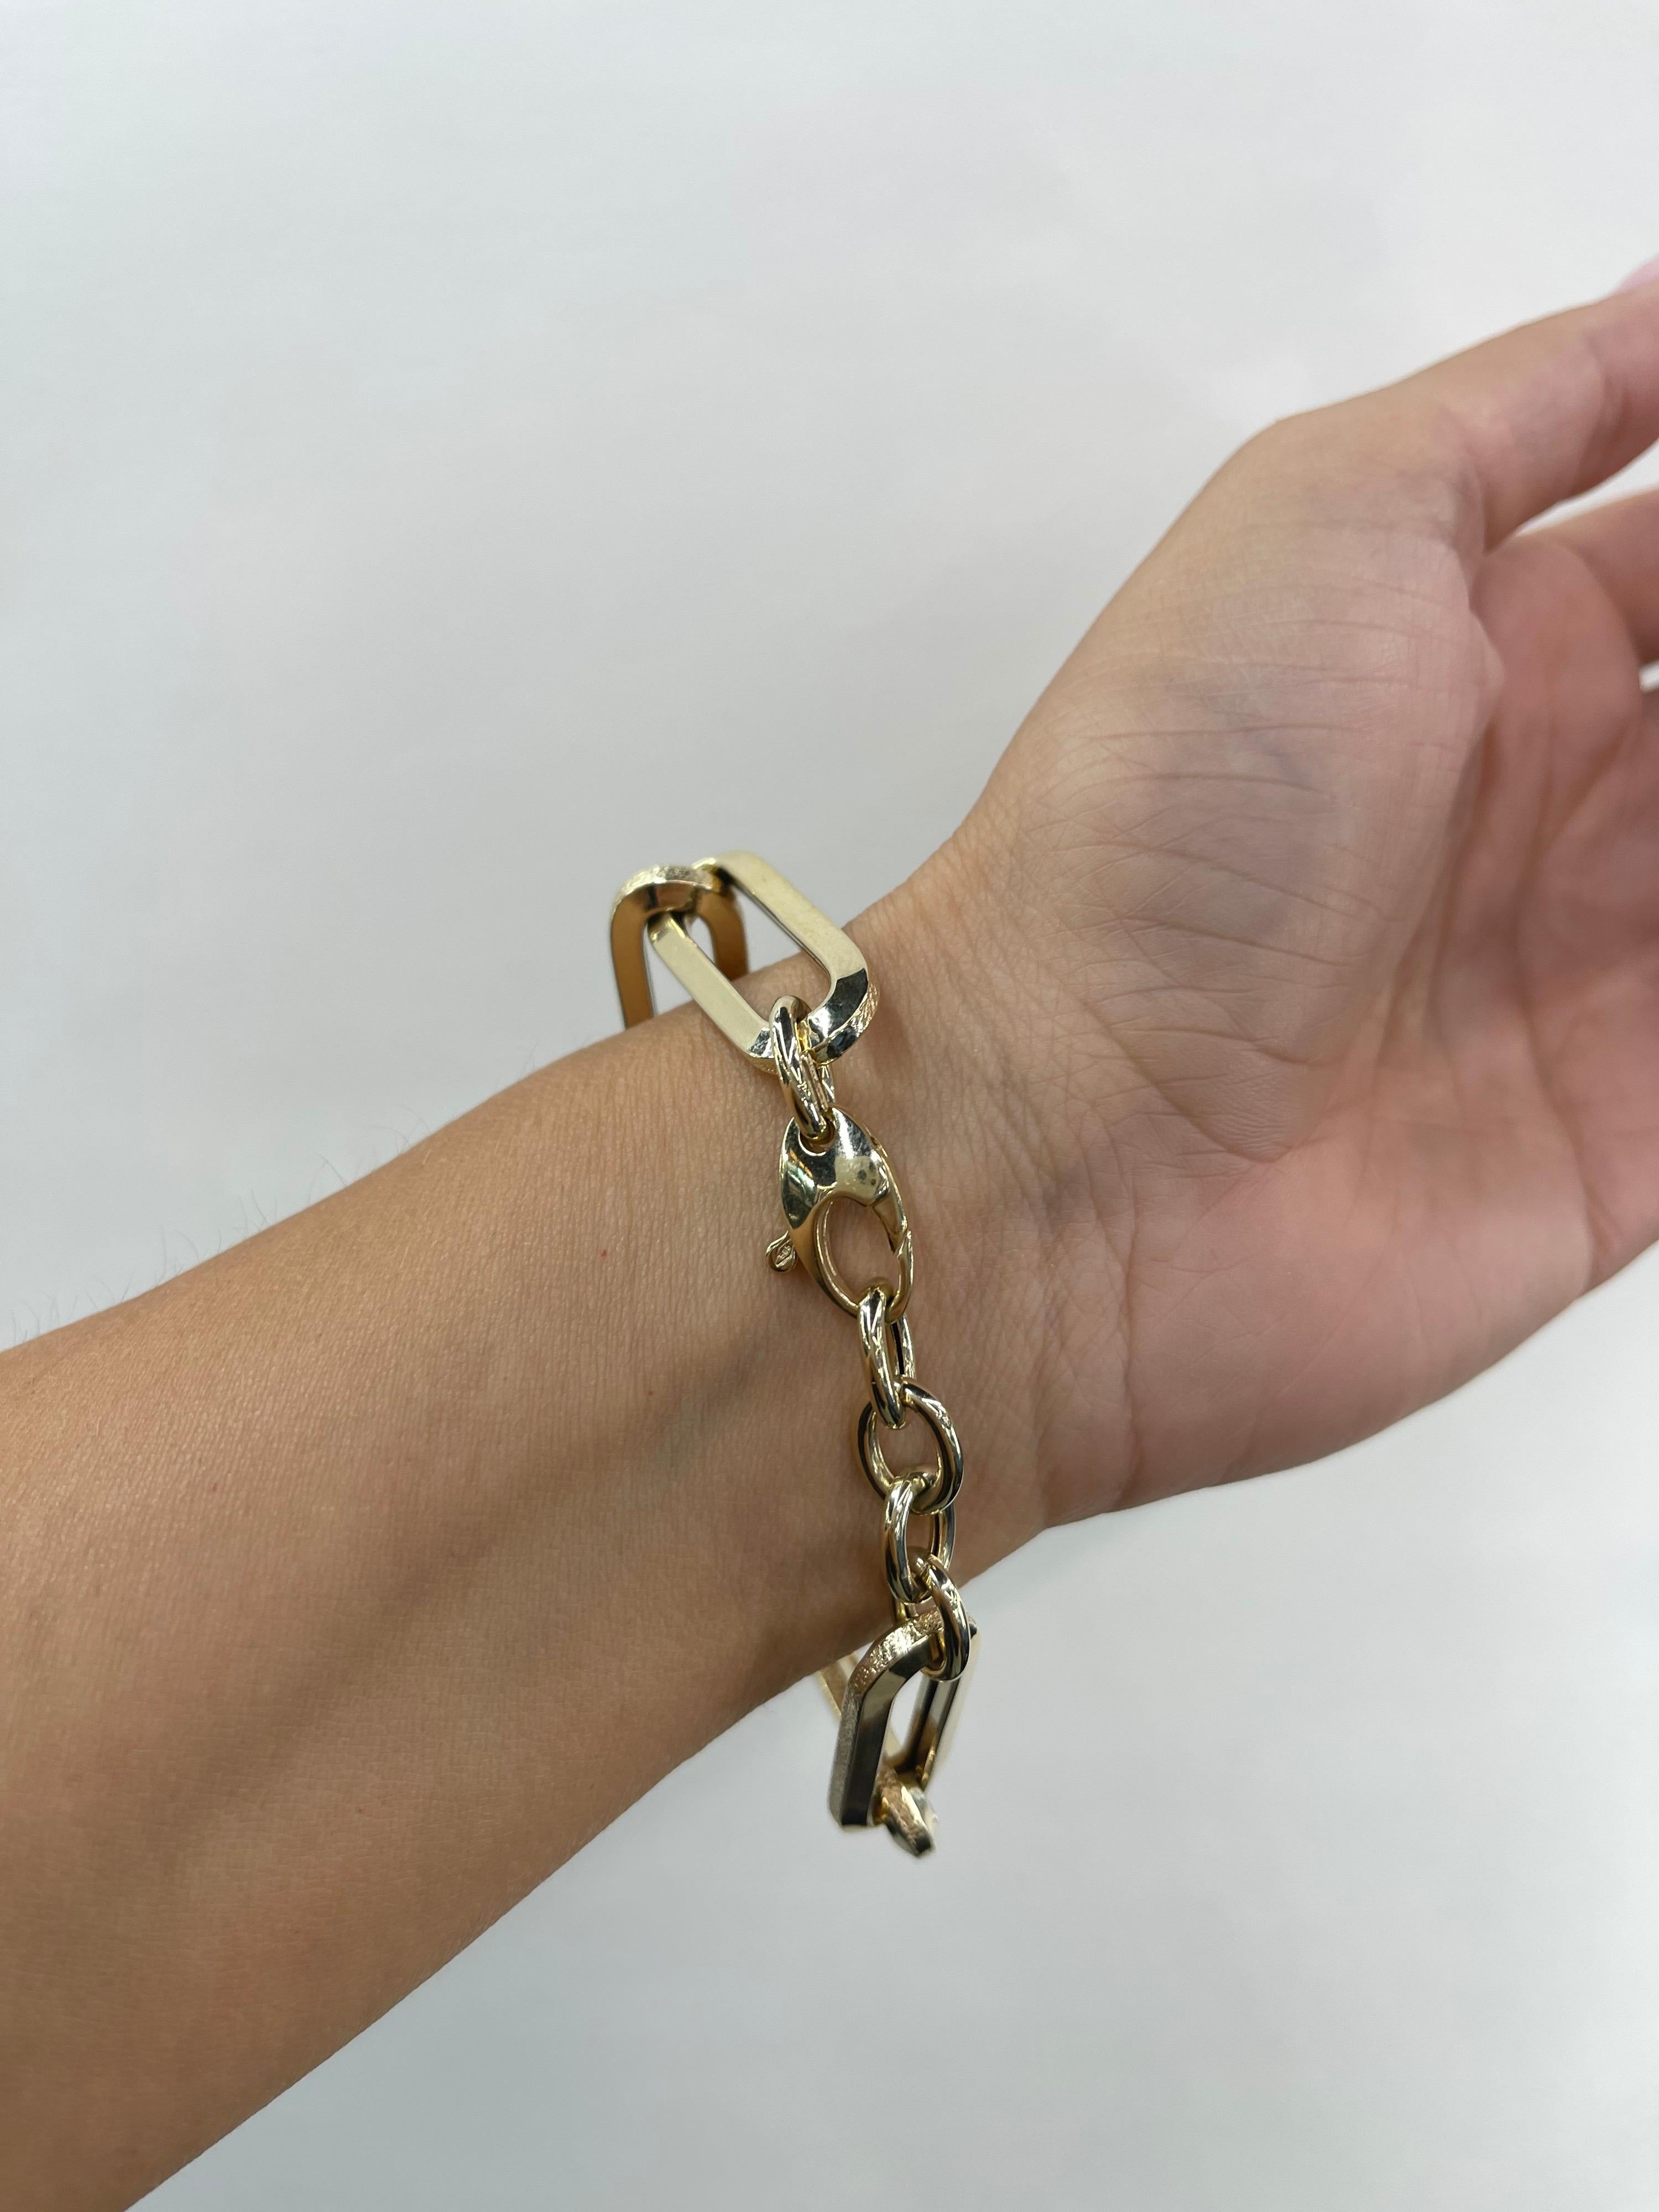 14 Karat Yellow Gold Textured Oversize Link Bracelet Made In Italy 11.23 Grams For Sale 2